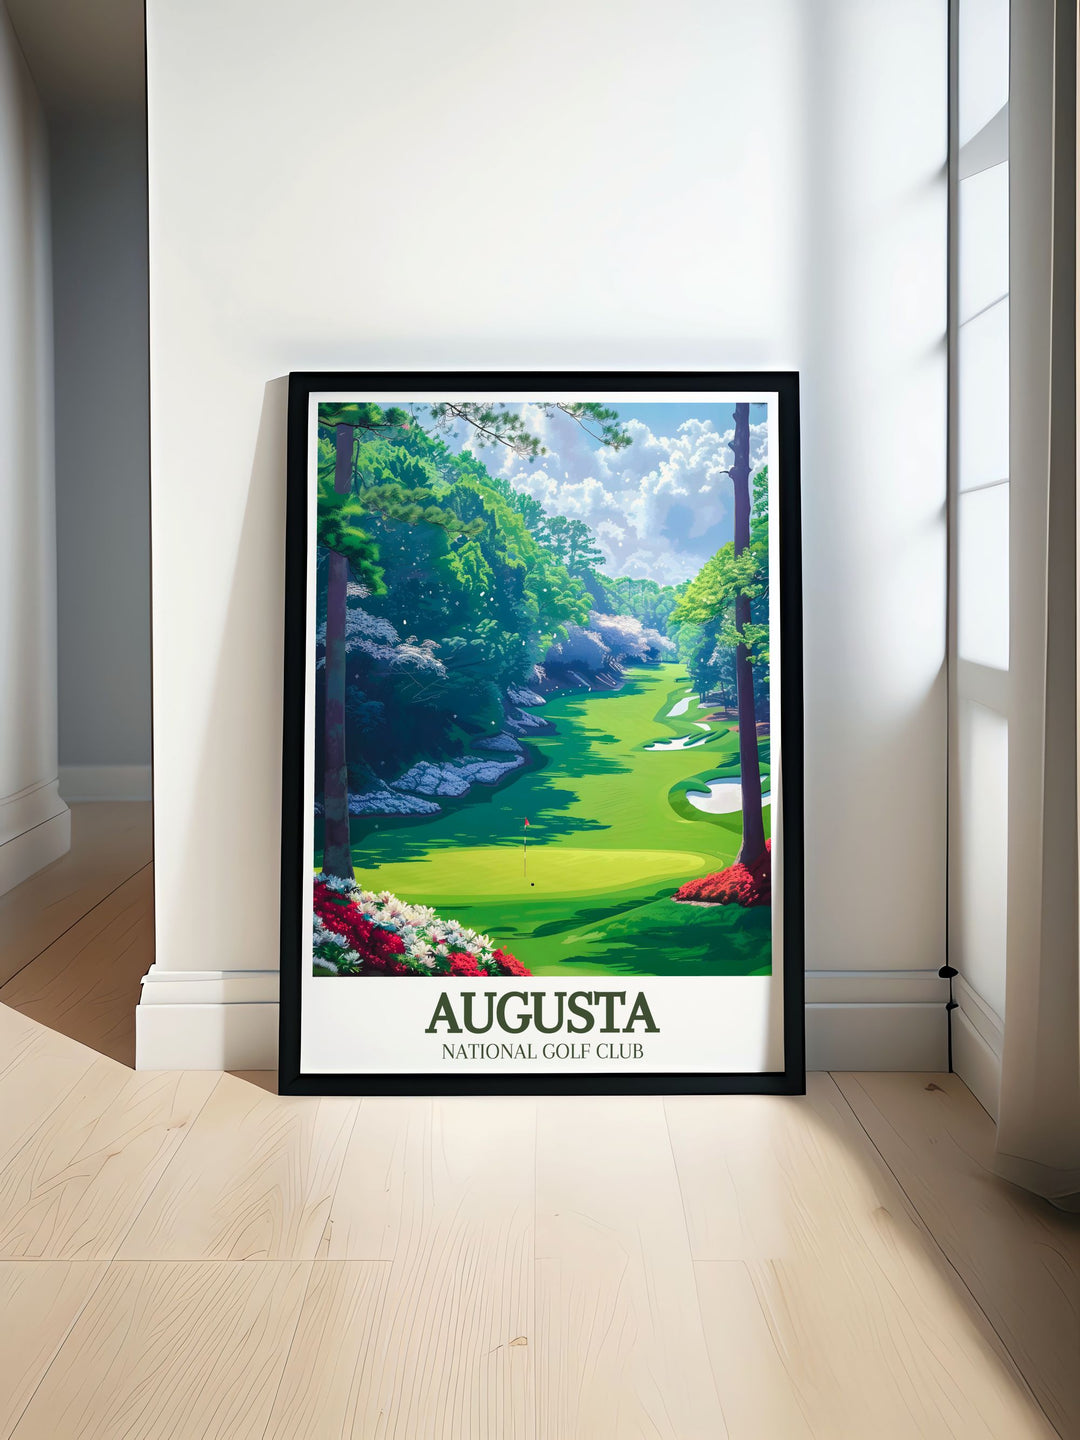 Vintage poster of Augusta National featuring Magnolia Lane Amen Corner perfect for golf enthusiasts and collectors ideal for personalized gifts and golf decor capturing the timeless beauty of this iconic golf course